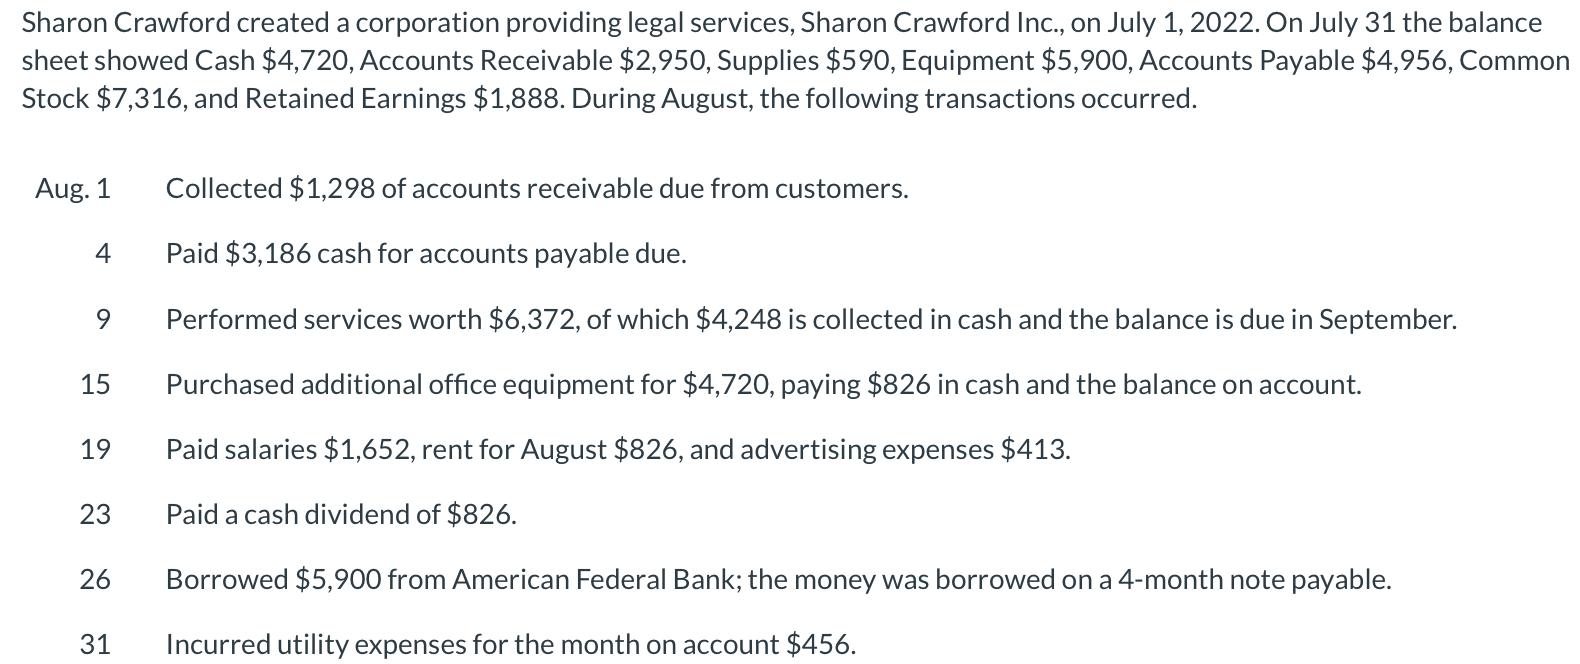 Sharon Crawford created a corporation providing legal services, Sharon Crawford Inc., on July 1, 2022. On July 31 the balance